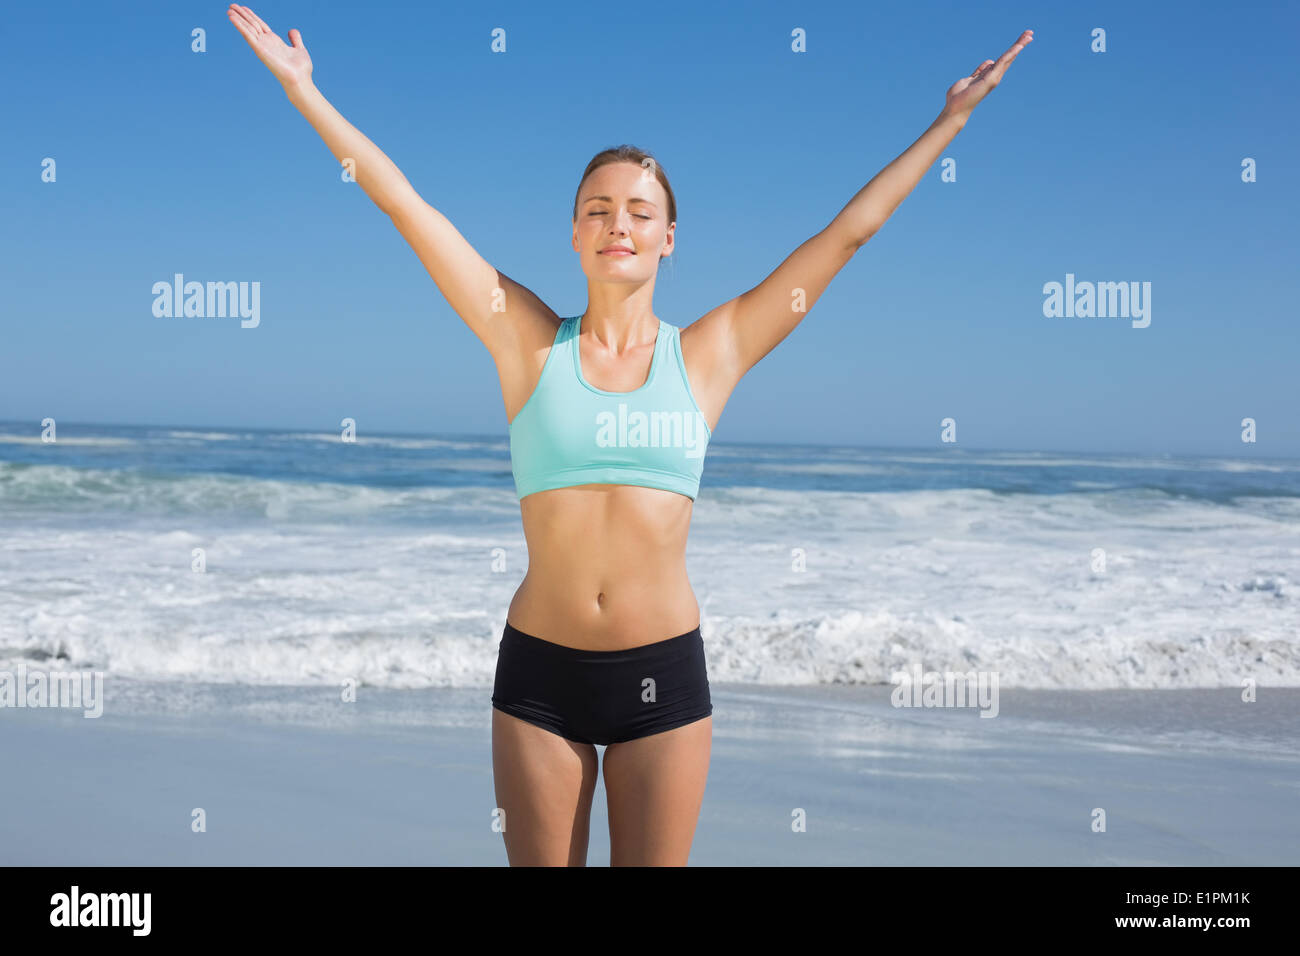 full length of fit woman in shorts and sports bra exercising on beach Stock  Photo - Alamy